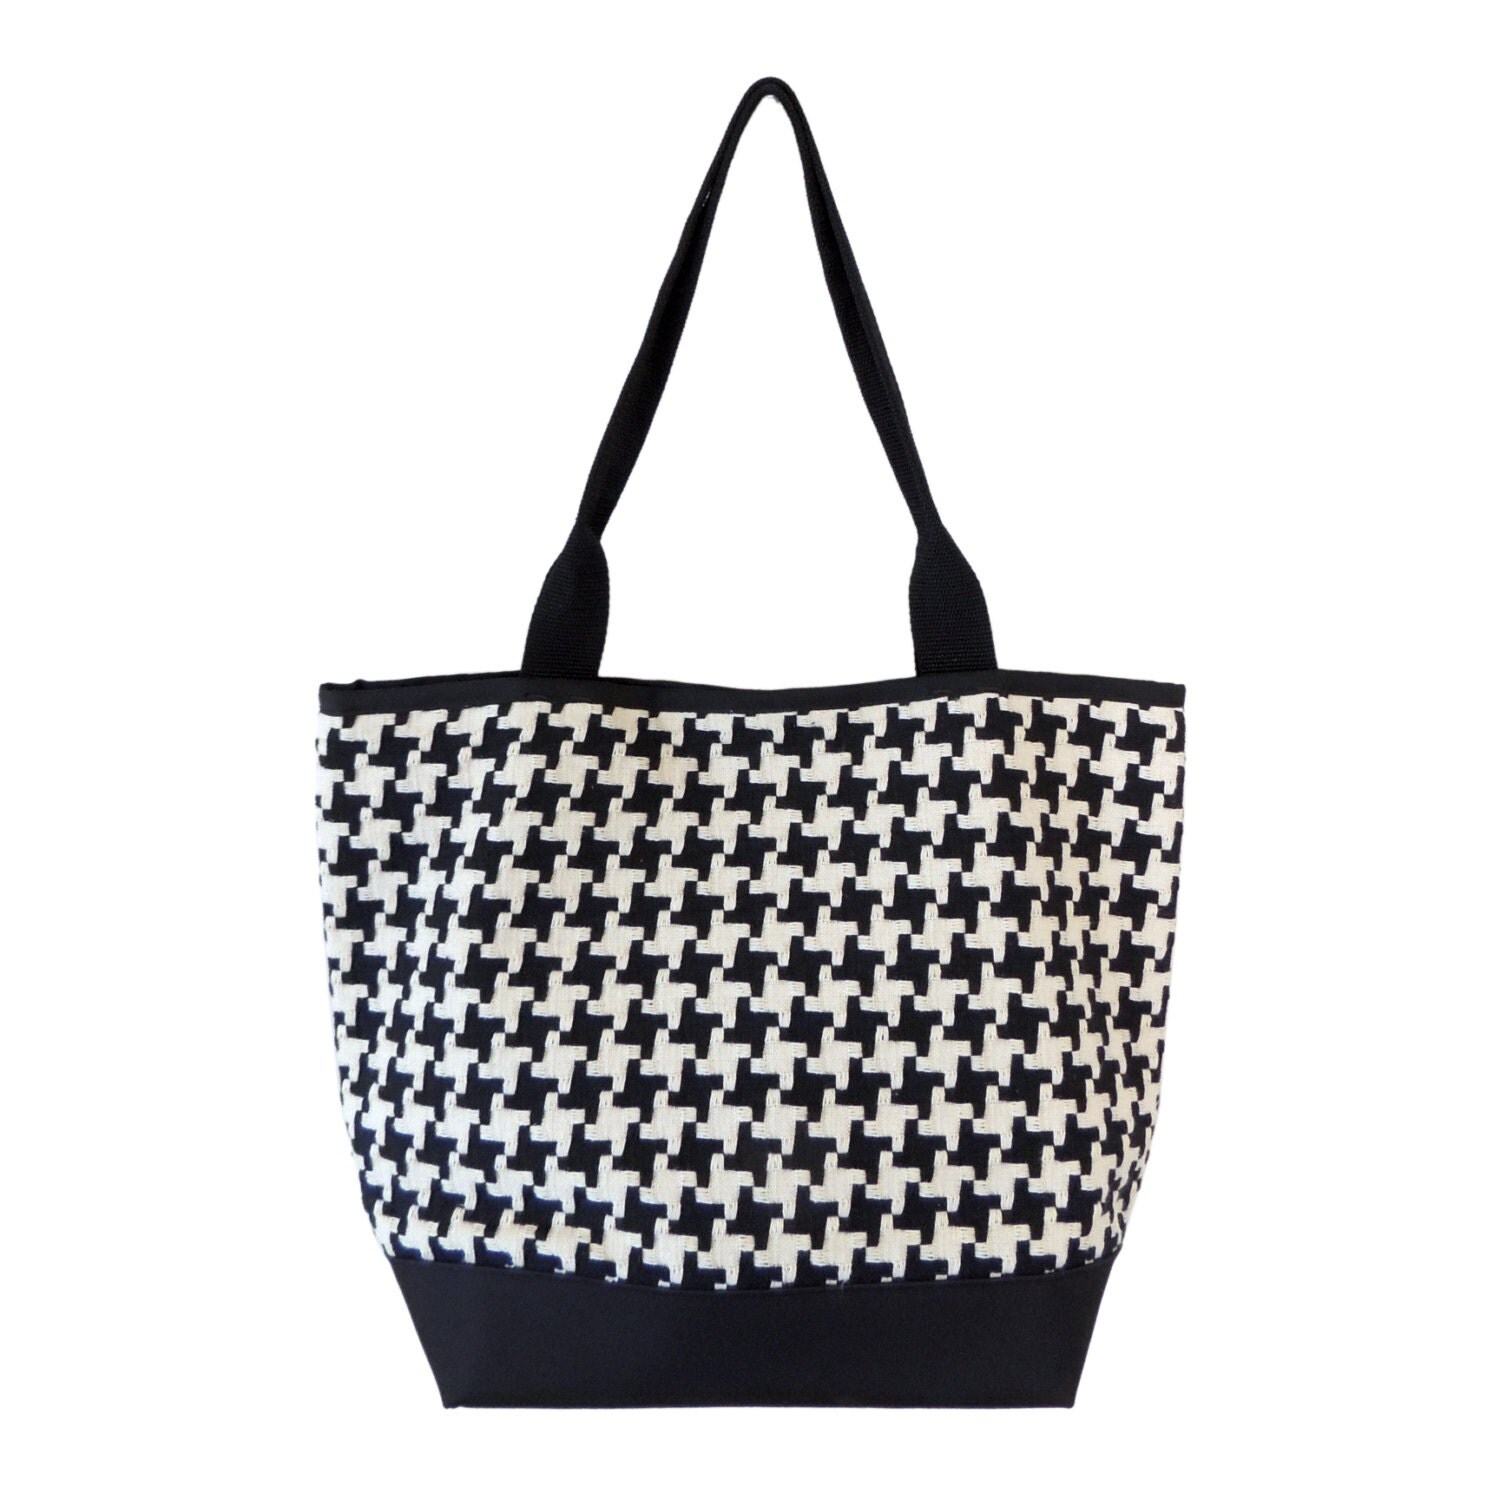 Houndstooth Tote in Black and White Large Carryall by SpicerBags